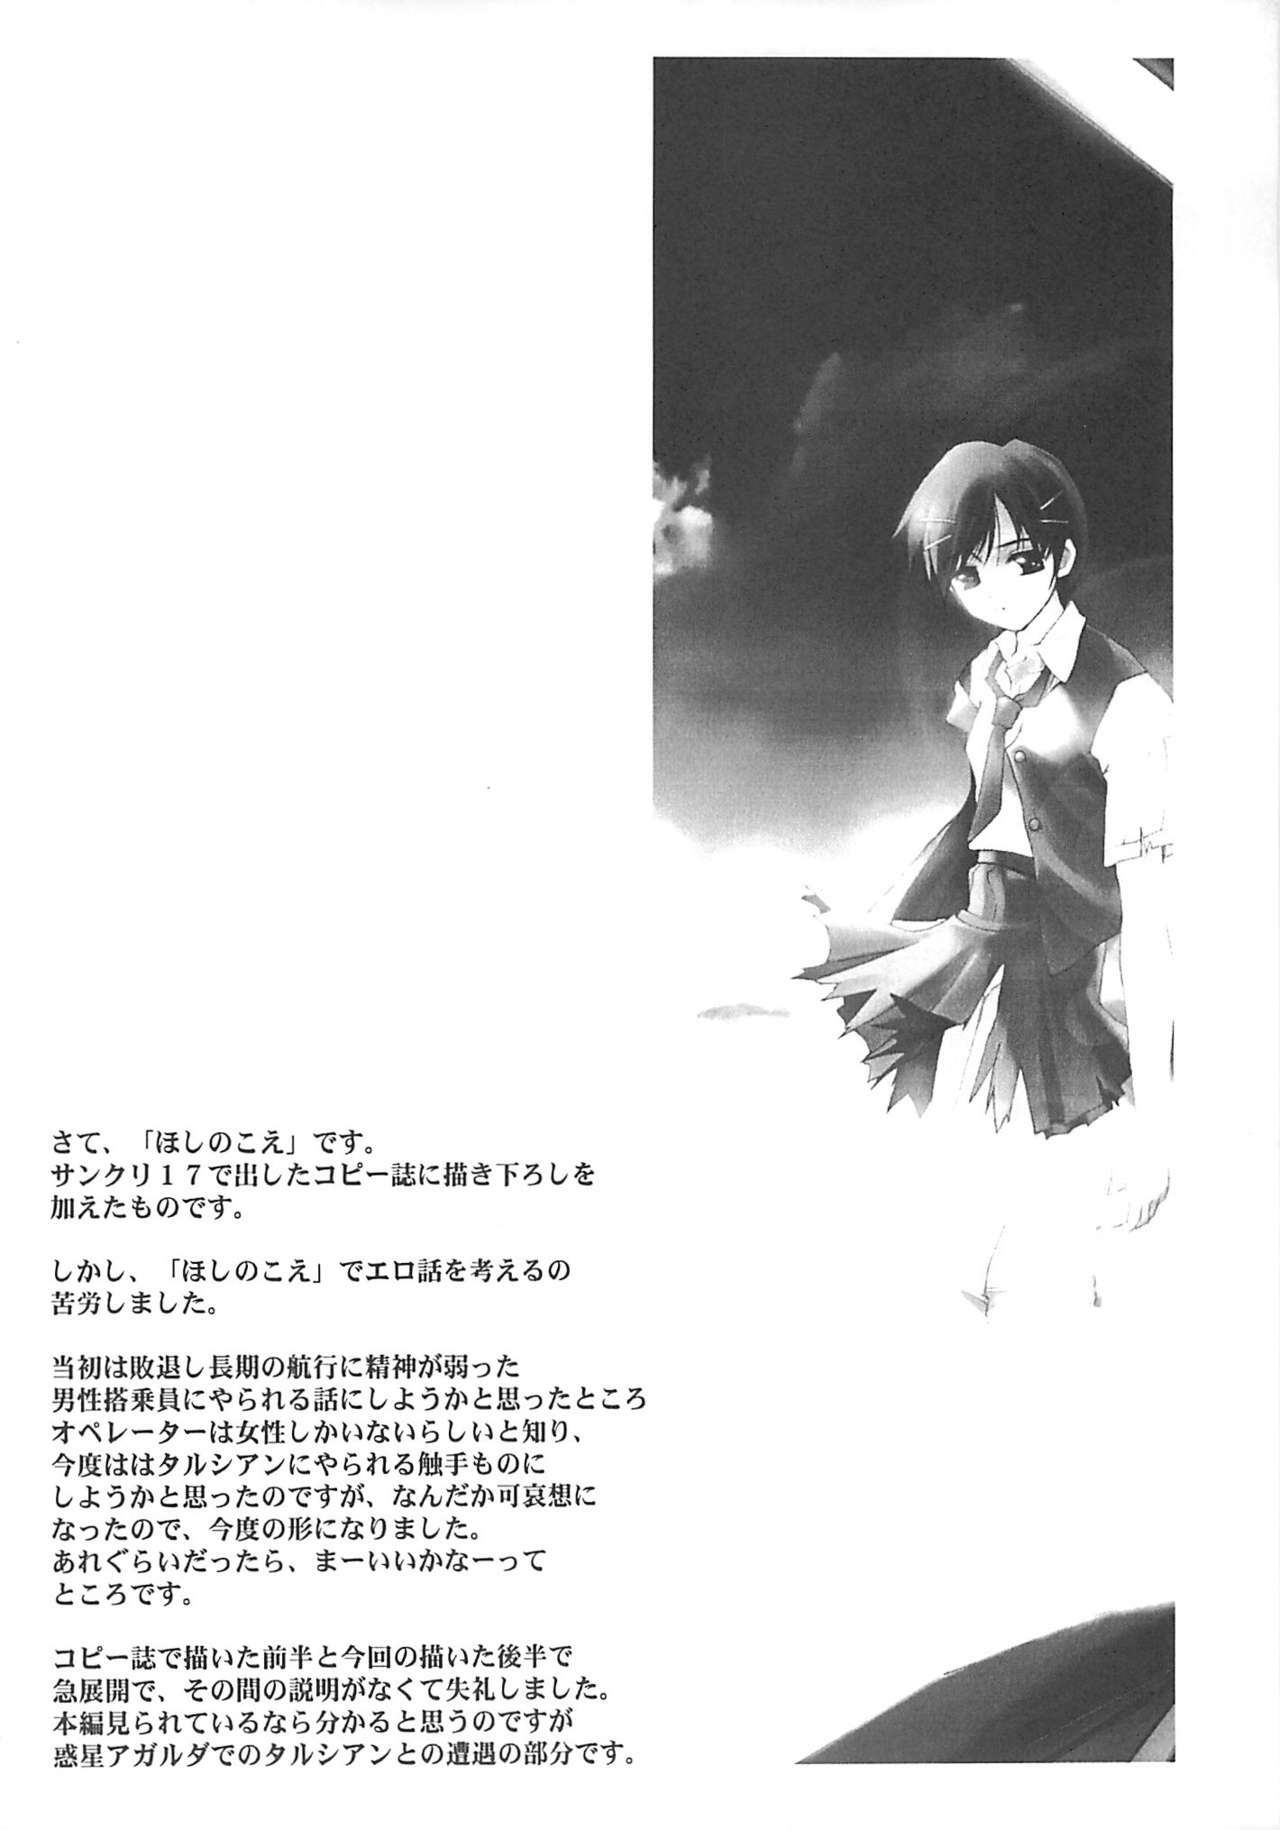 [RYU-SEKI-DO (Nagare Hyo-go)] Cut Glass (G-on Riders, Hoshi no Koe: The Voices of a Distant Star) page 21 full